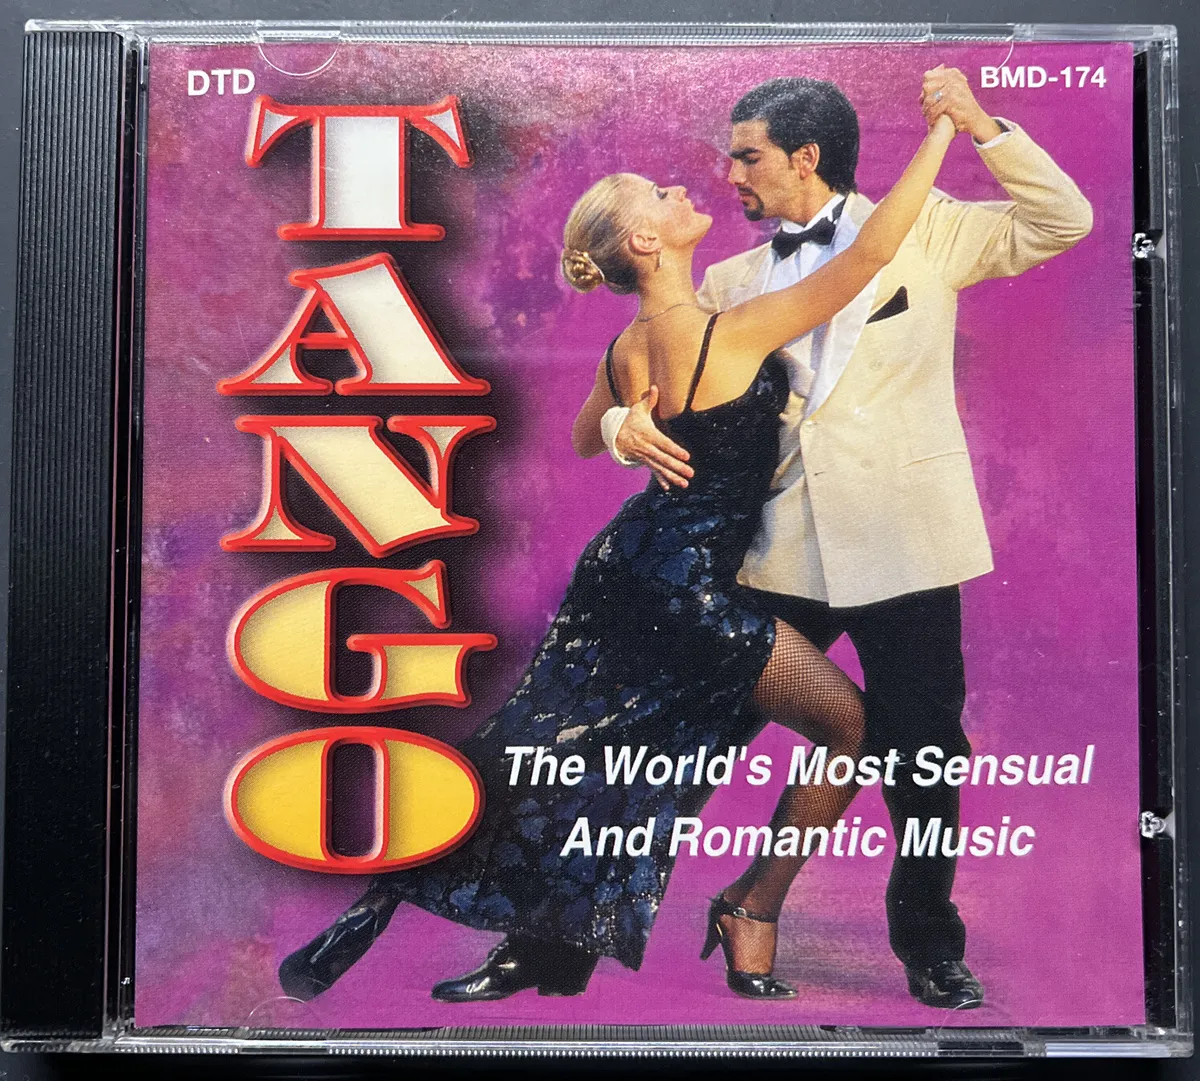 Tango - The World's Most Snesual And Romantic Music (Music CD)